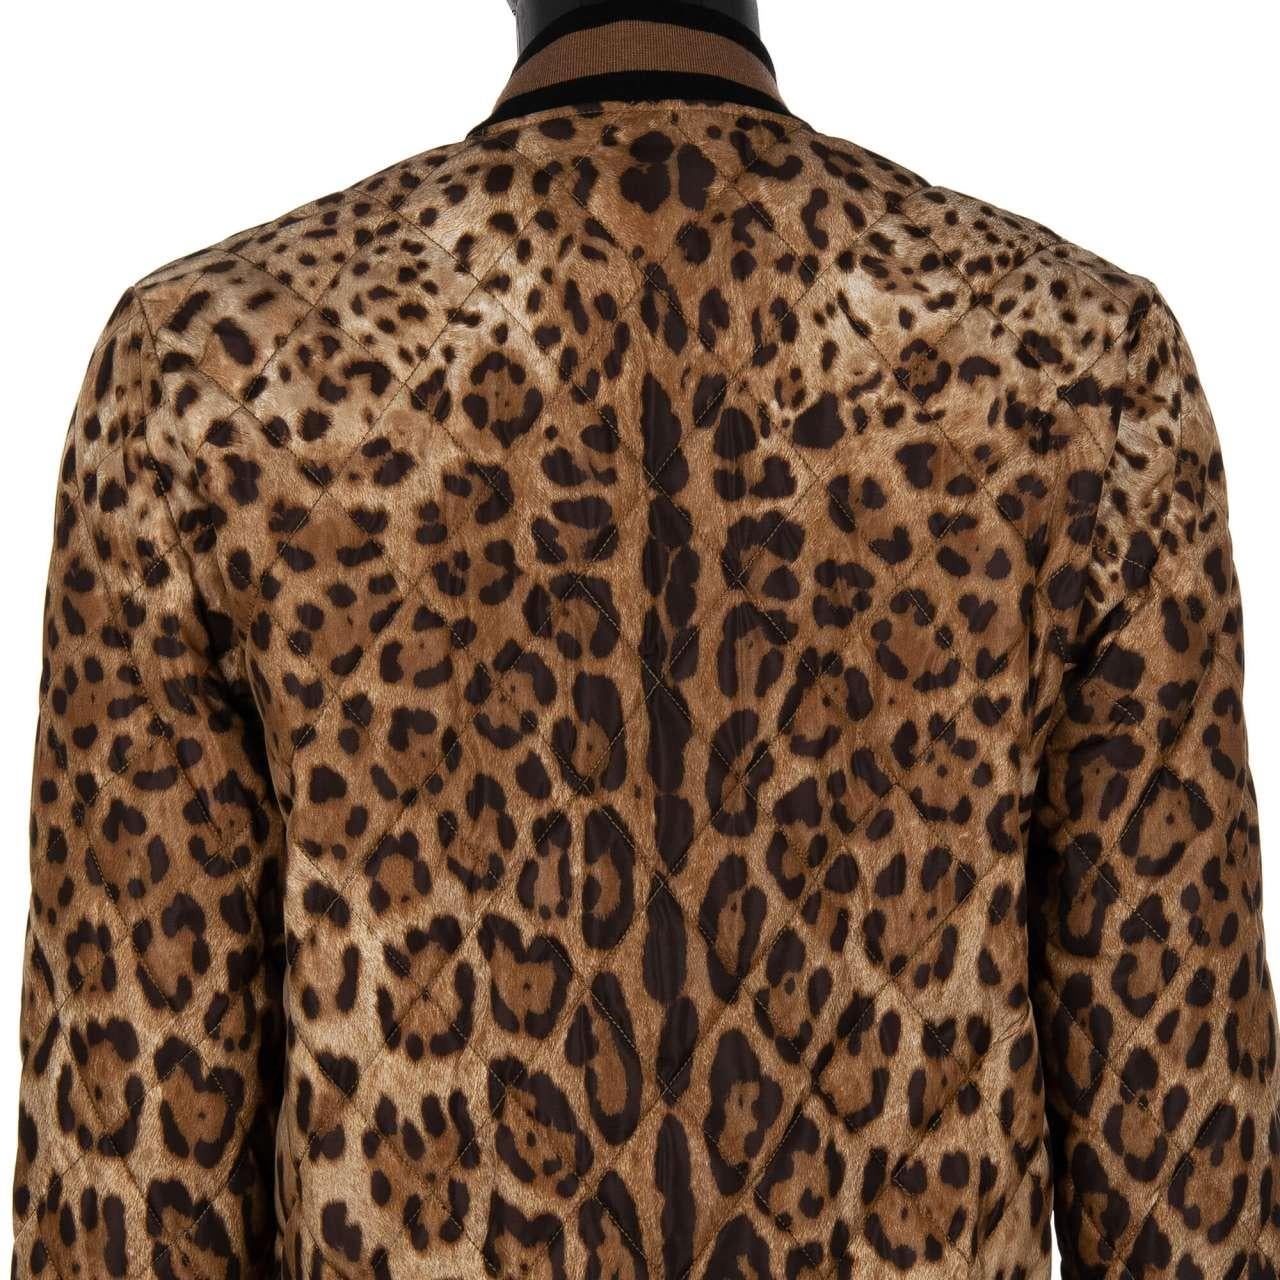 D&G Quilted Leopard Printed Nylon Bomber Jacket with DG Logo Brown Black 50 For Sale 1